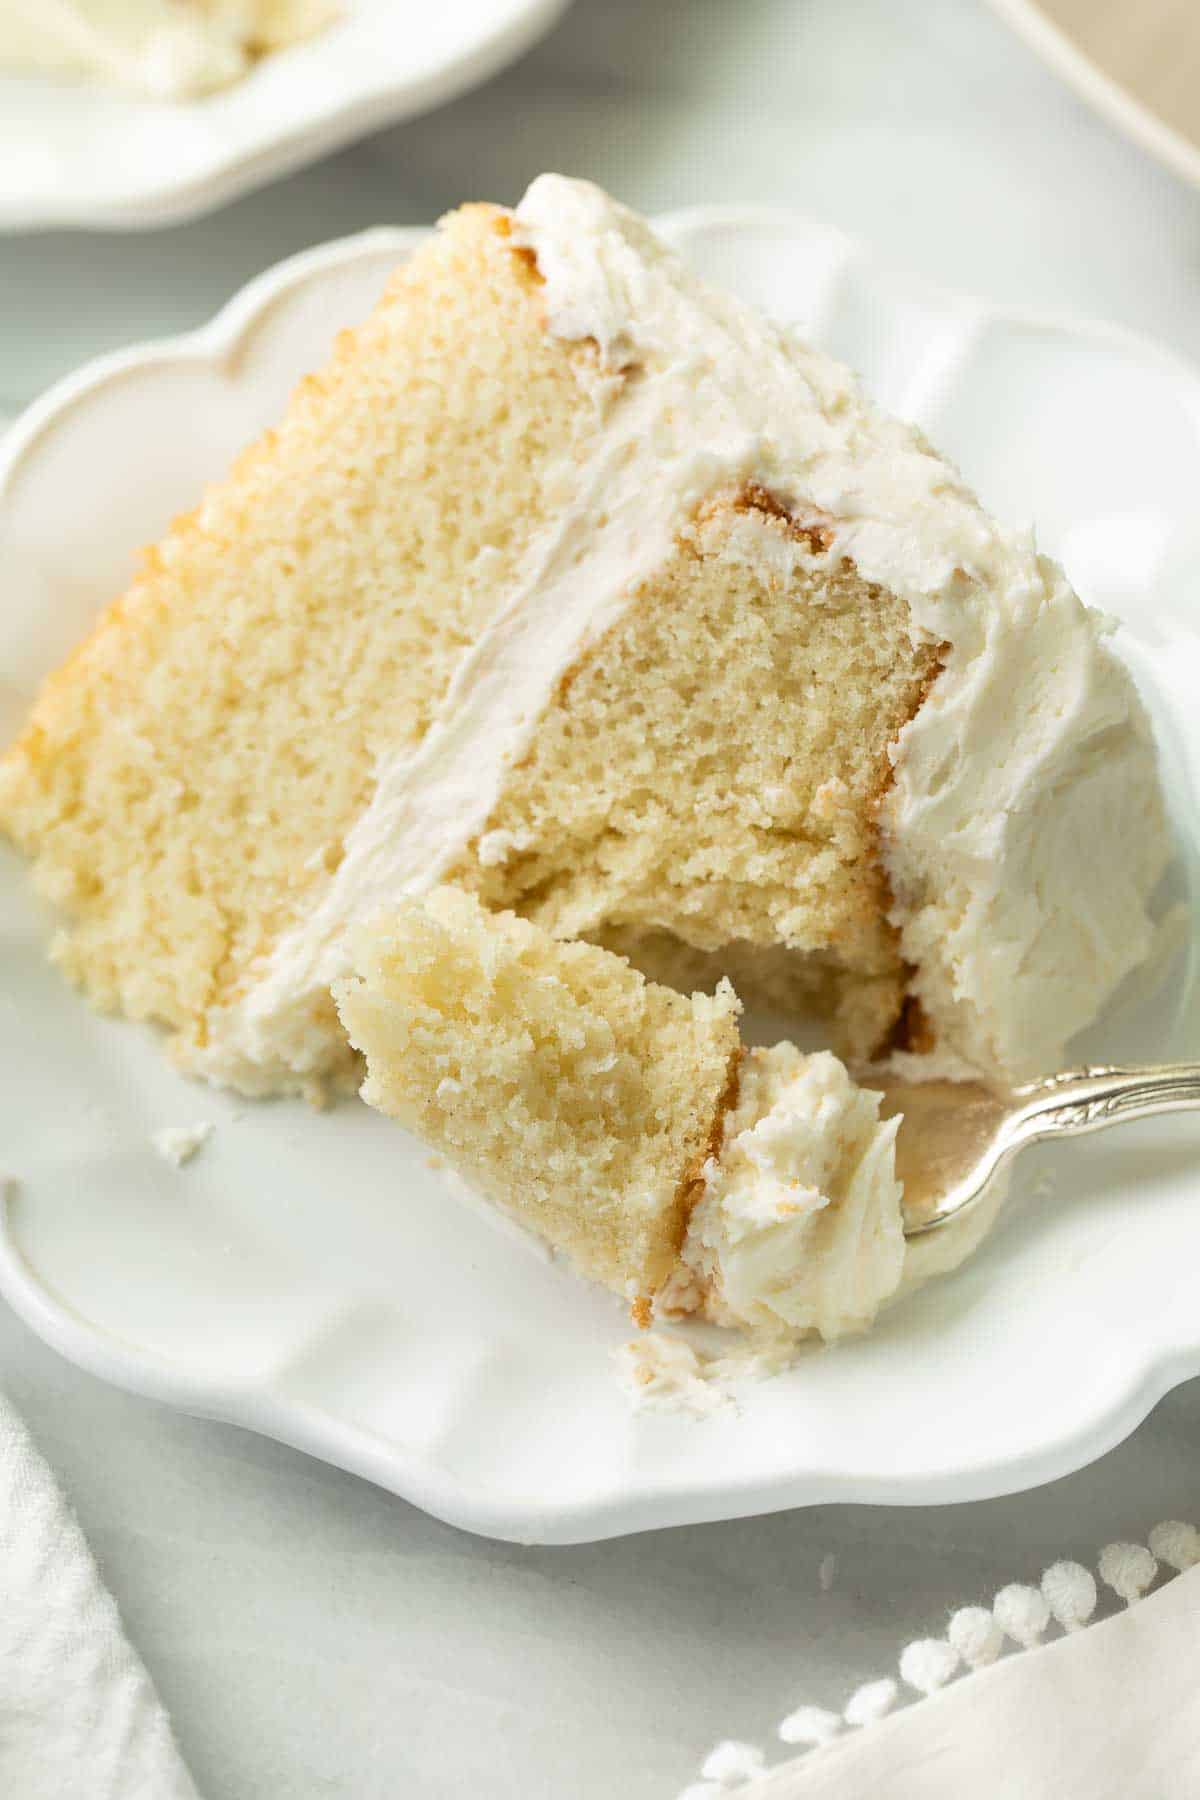 slice of gluten free cake on white plate with fork taking bite